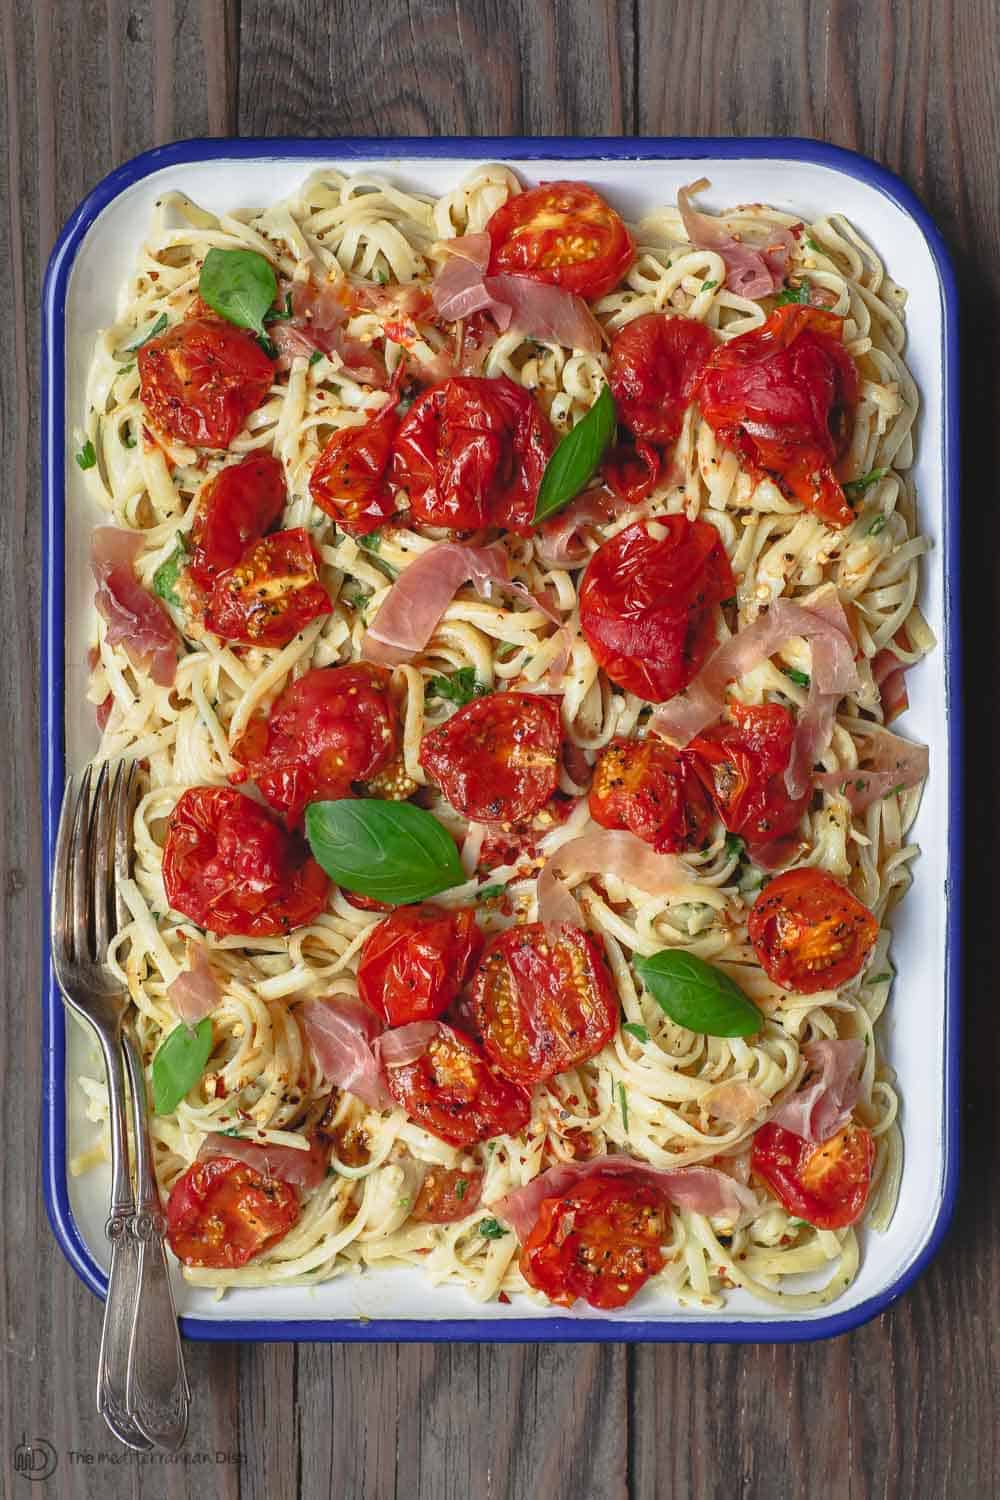 Carbonara Recipe with Roasted Tomatoes | The Mediterranean Dish. A lighter, and flavor-packed cabornara recipes with garlic roasted tomatoes and fresh herbs. You can add ribbons of prosciutto, if you like. A couple of tricks make a perfectly creamy carbonara. Recipe from themediterraneandish.com #pasta #pastarecipe #italianfood #mediterraneandiet #carbonara #easyrecipe